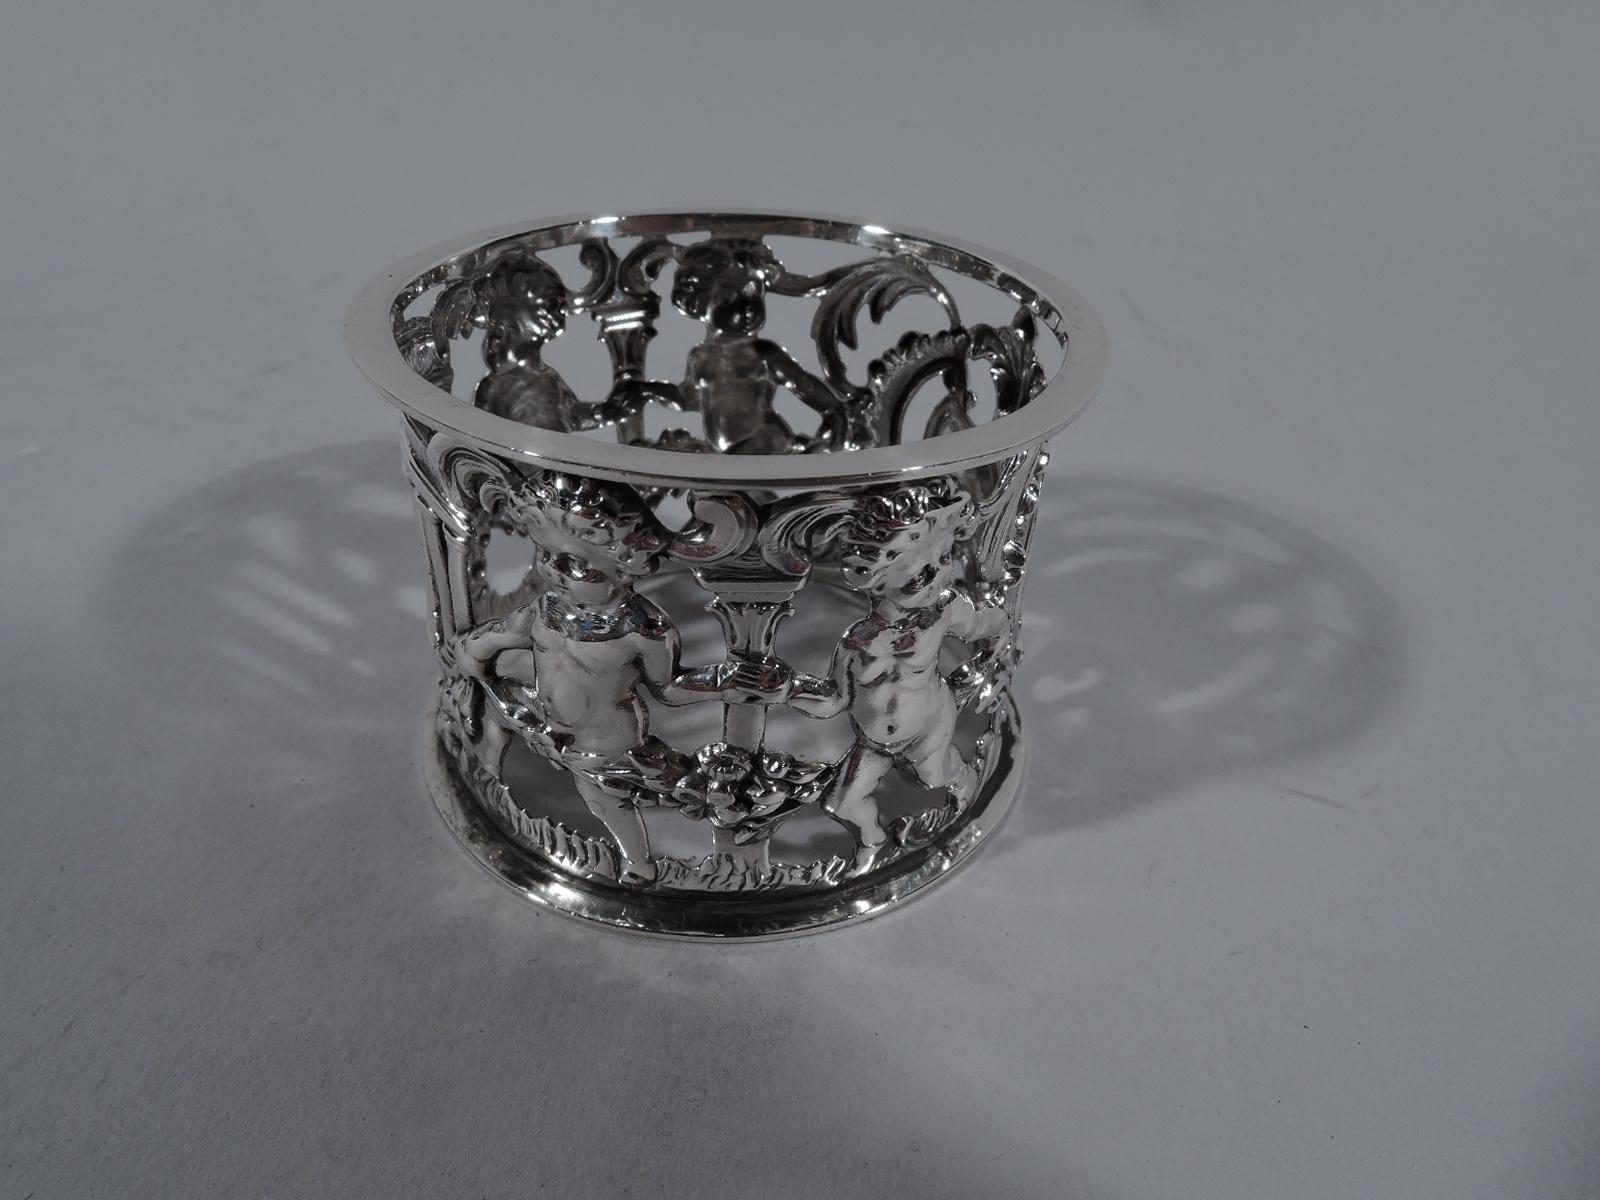 English Edwardian sterling silver napkin rings, 1906-1907. Each: Open sides with classical colonnade and cherubs dancing with garland, which they carry, climb over, and thread between their chubby thighs. Frothy classicism. Armorial cartouche